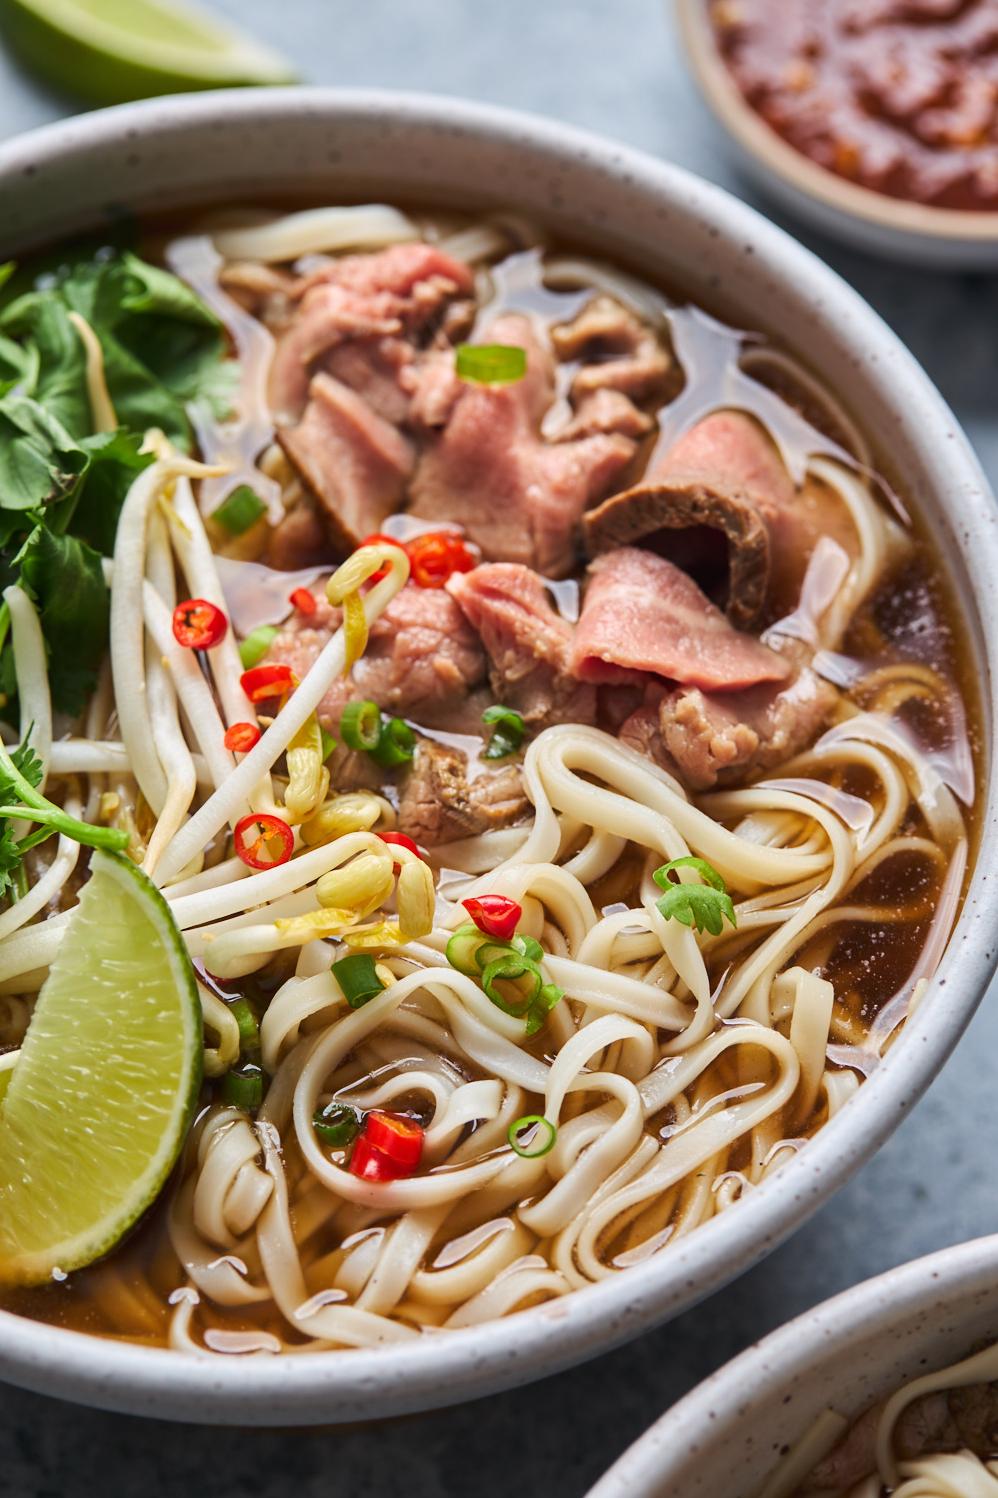  All the flavor in this Pho Bo comes from the spices and herbs simmered in the broth